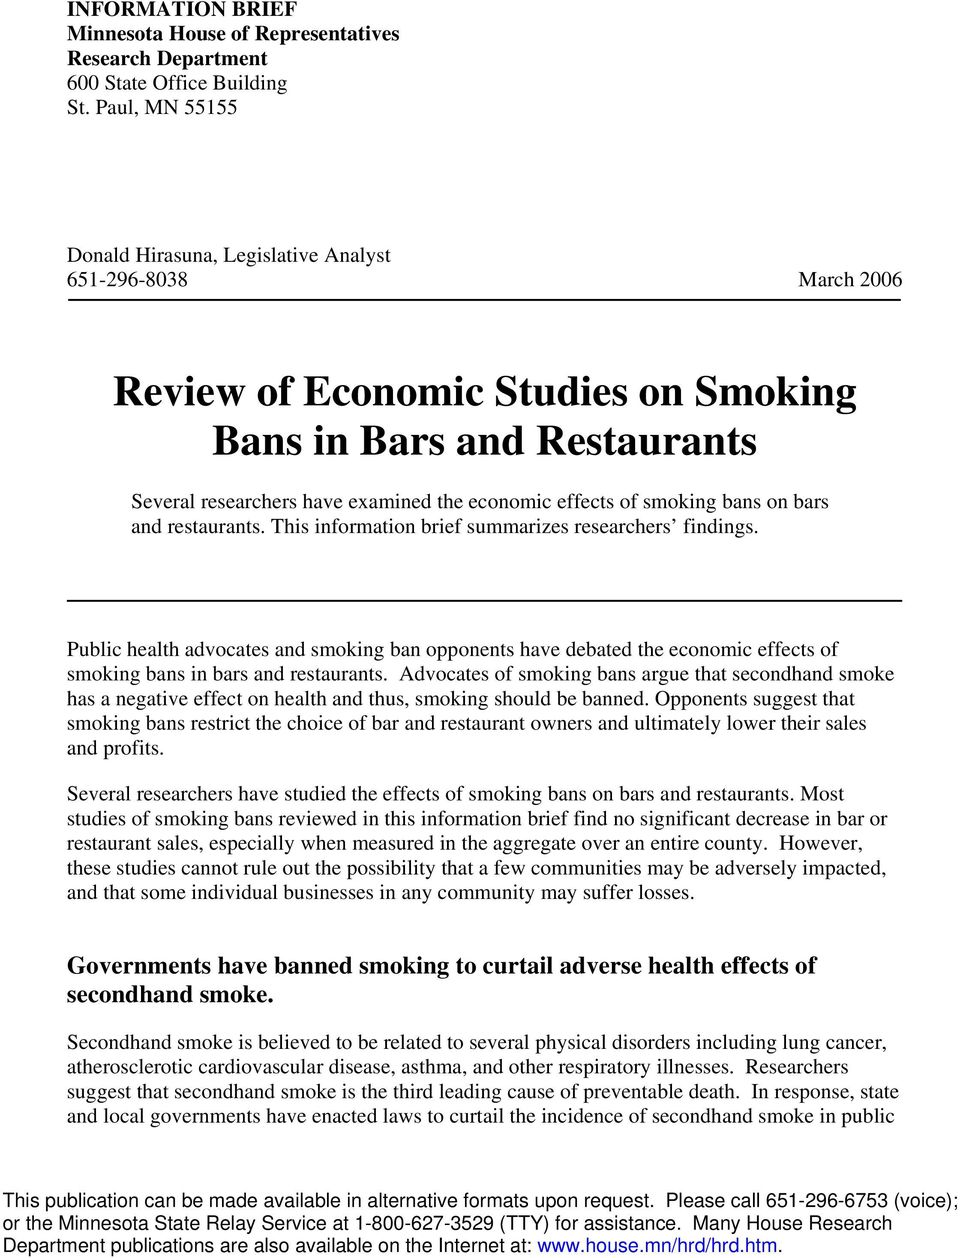 of smoking bans on bars and restaurants. This information brief summarizes researchers findings.